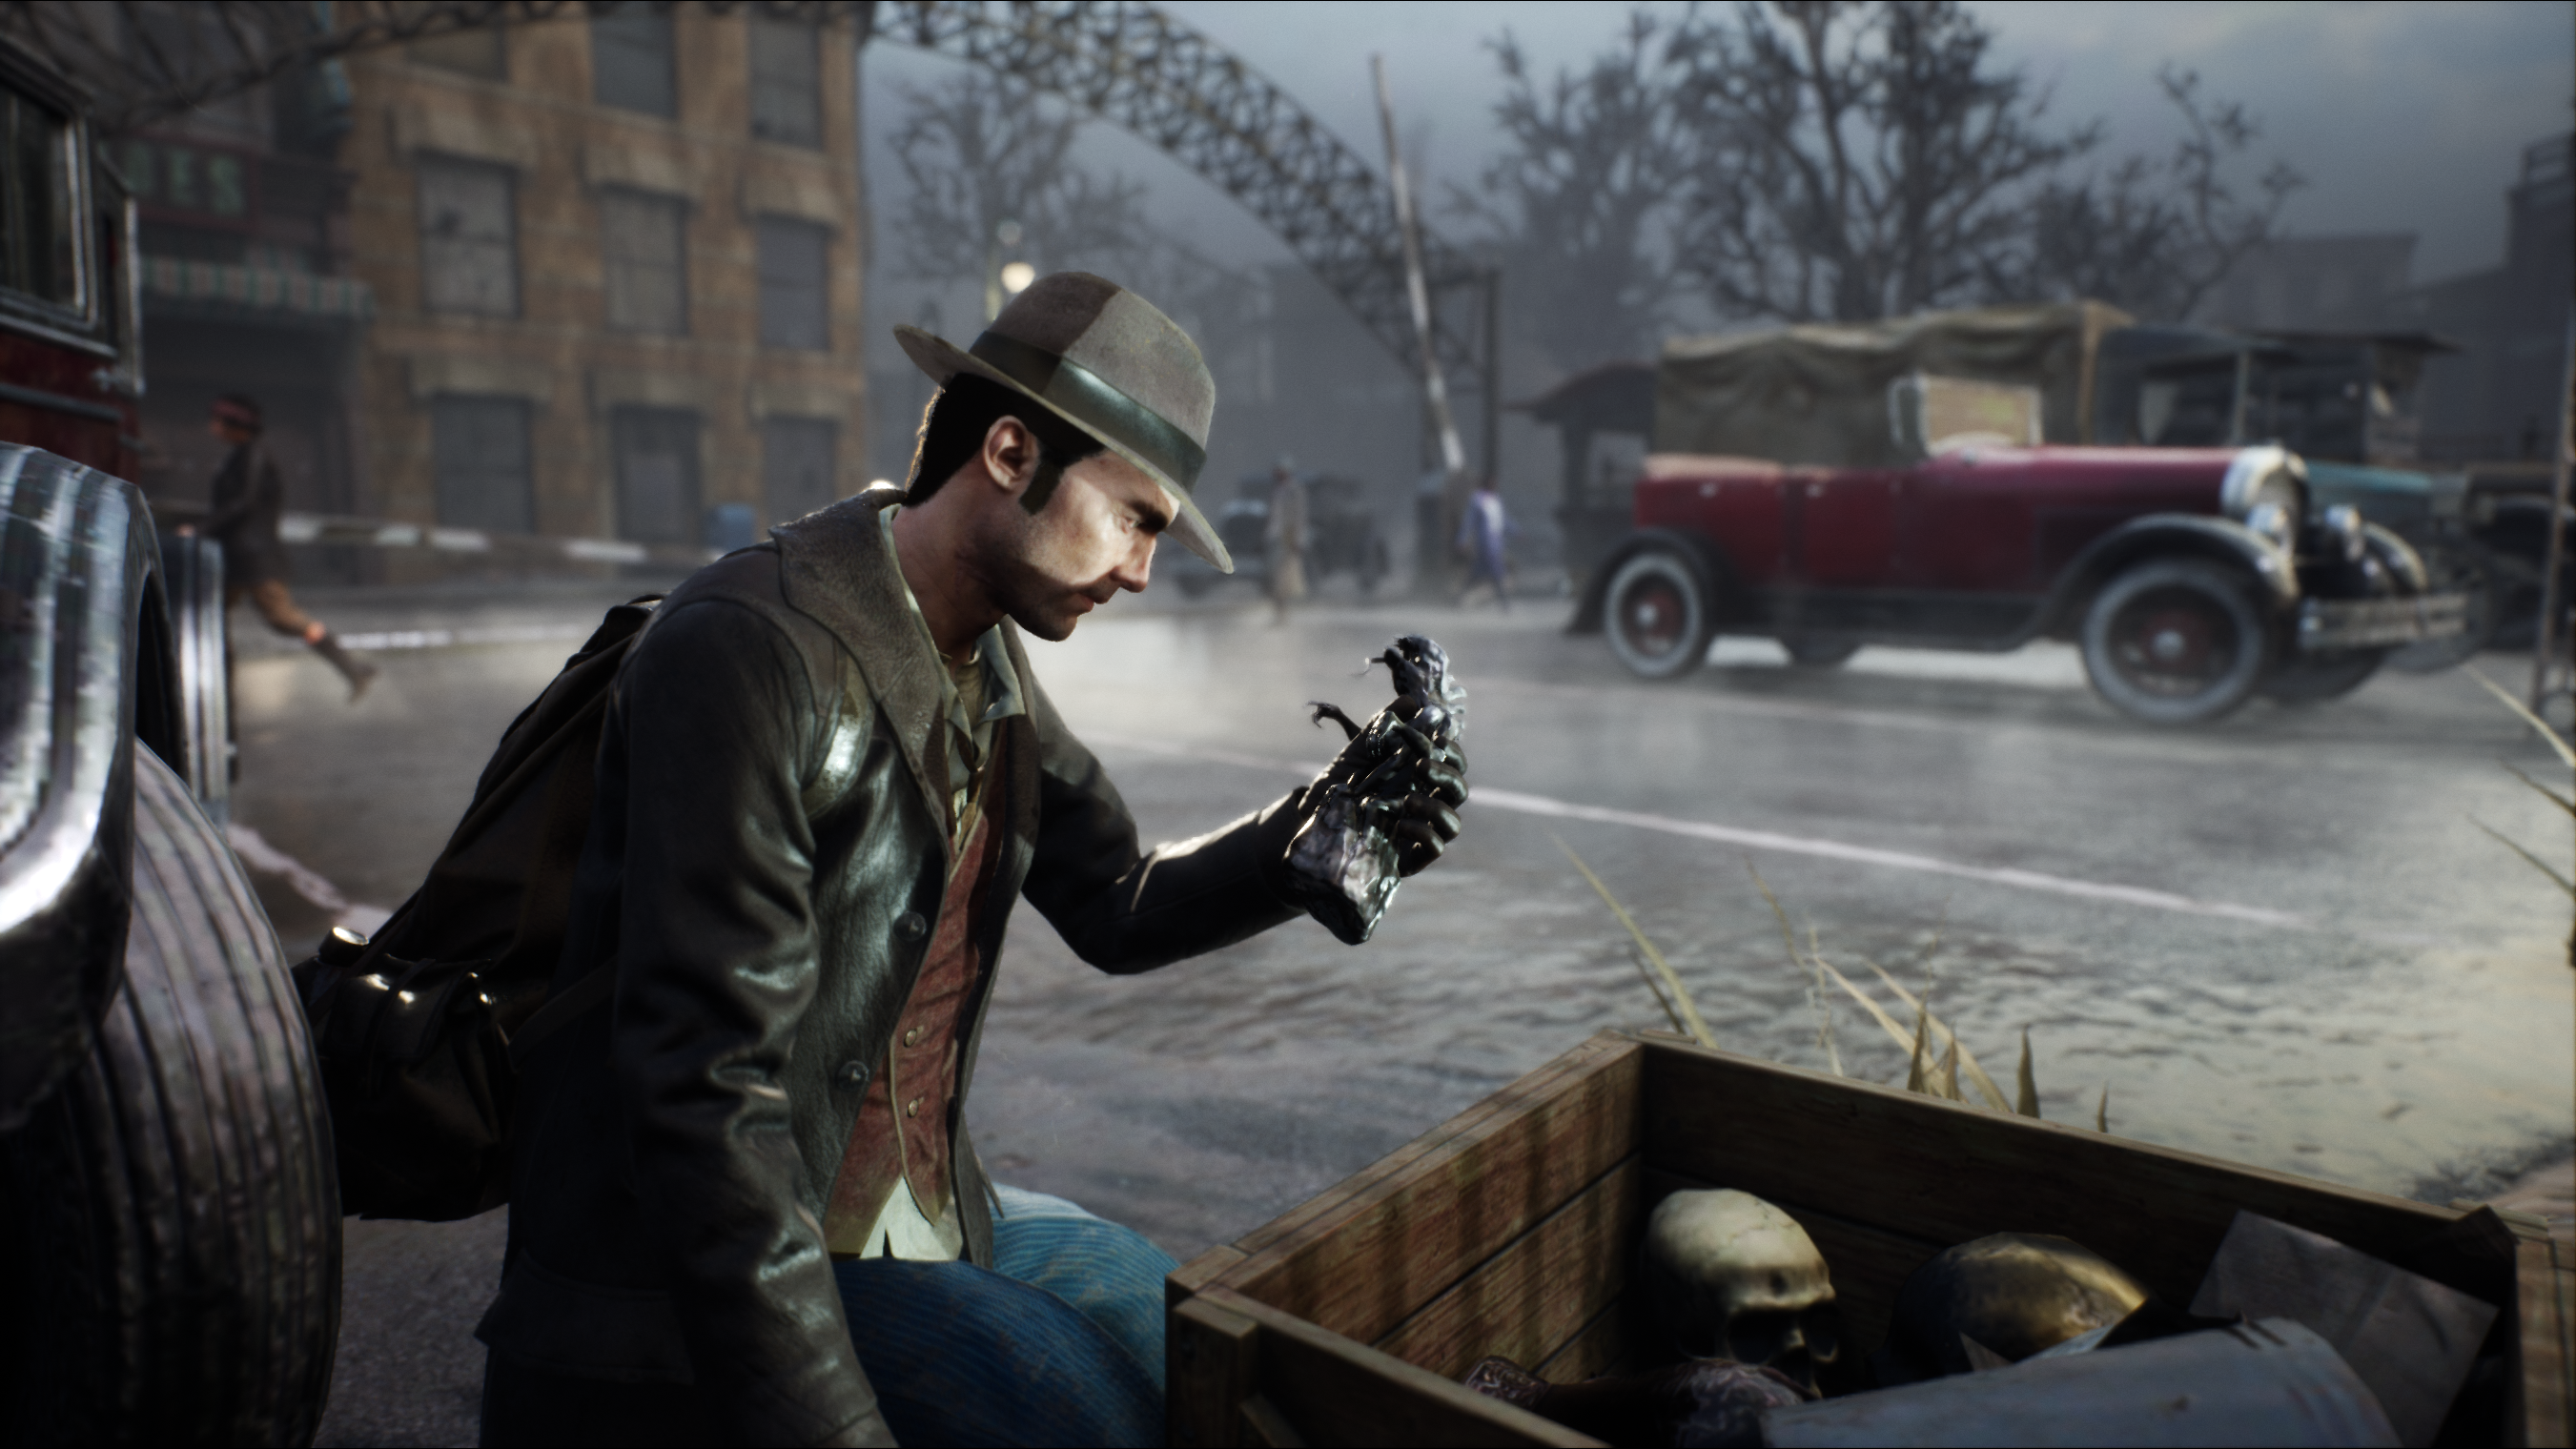 Image for The Sinking City gets a creepy Lovecraftian trailer